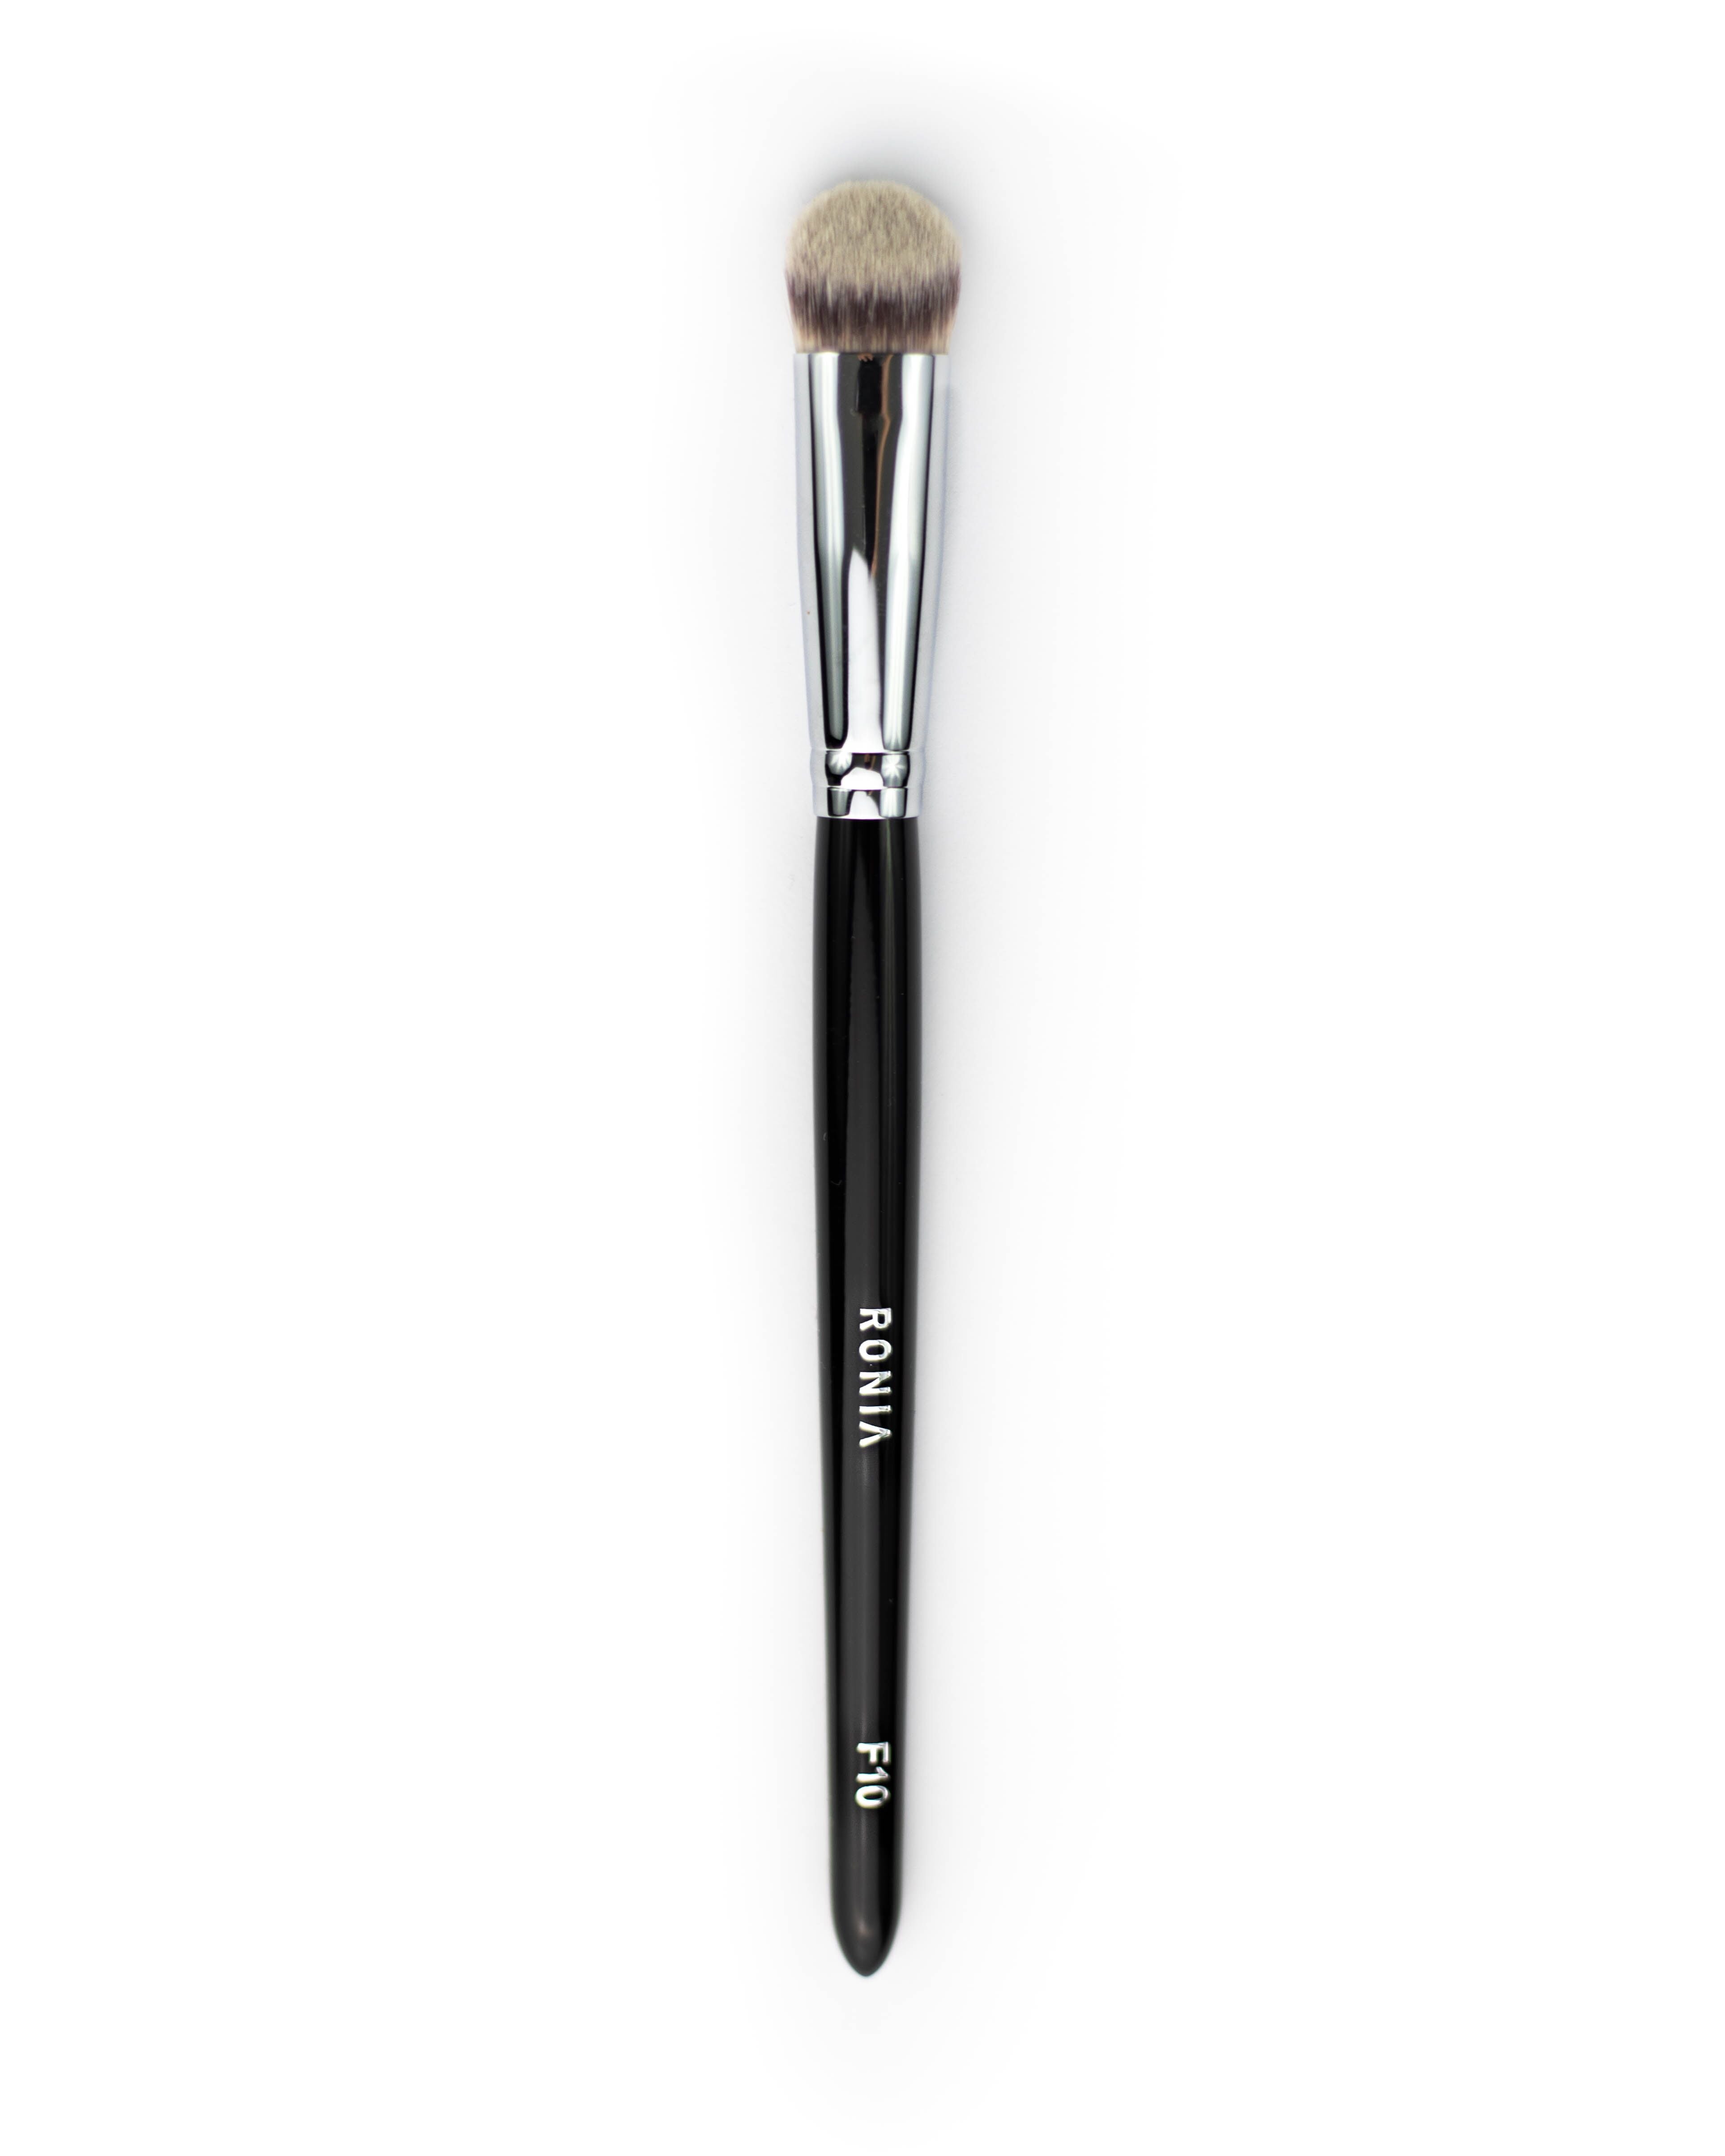 TOP 5 BEST FOUNDATION BRUSHES